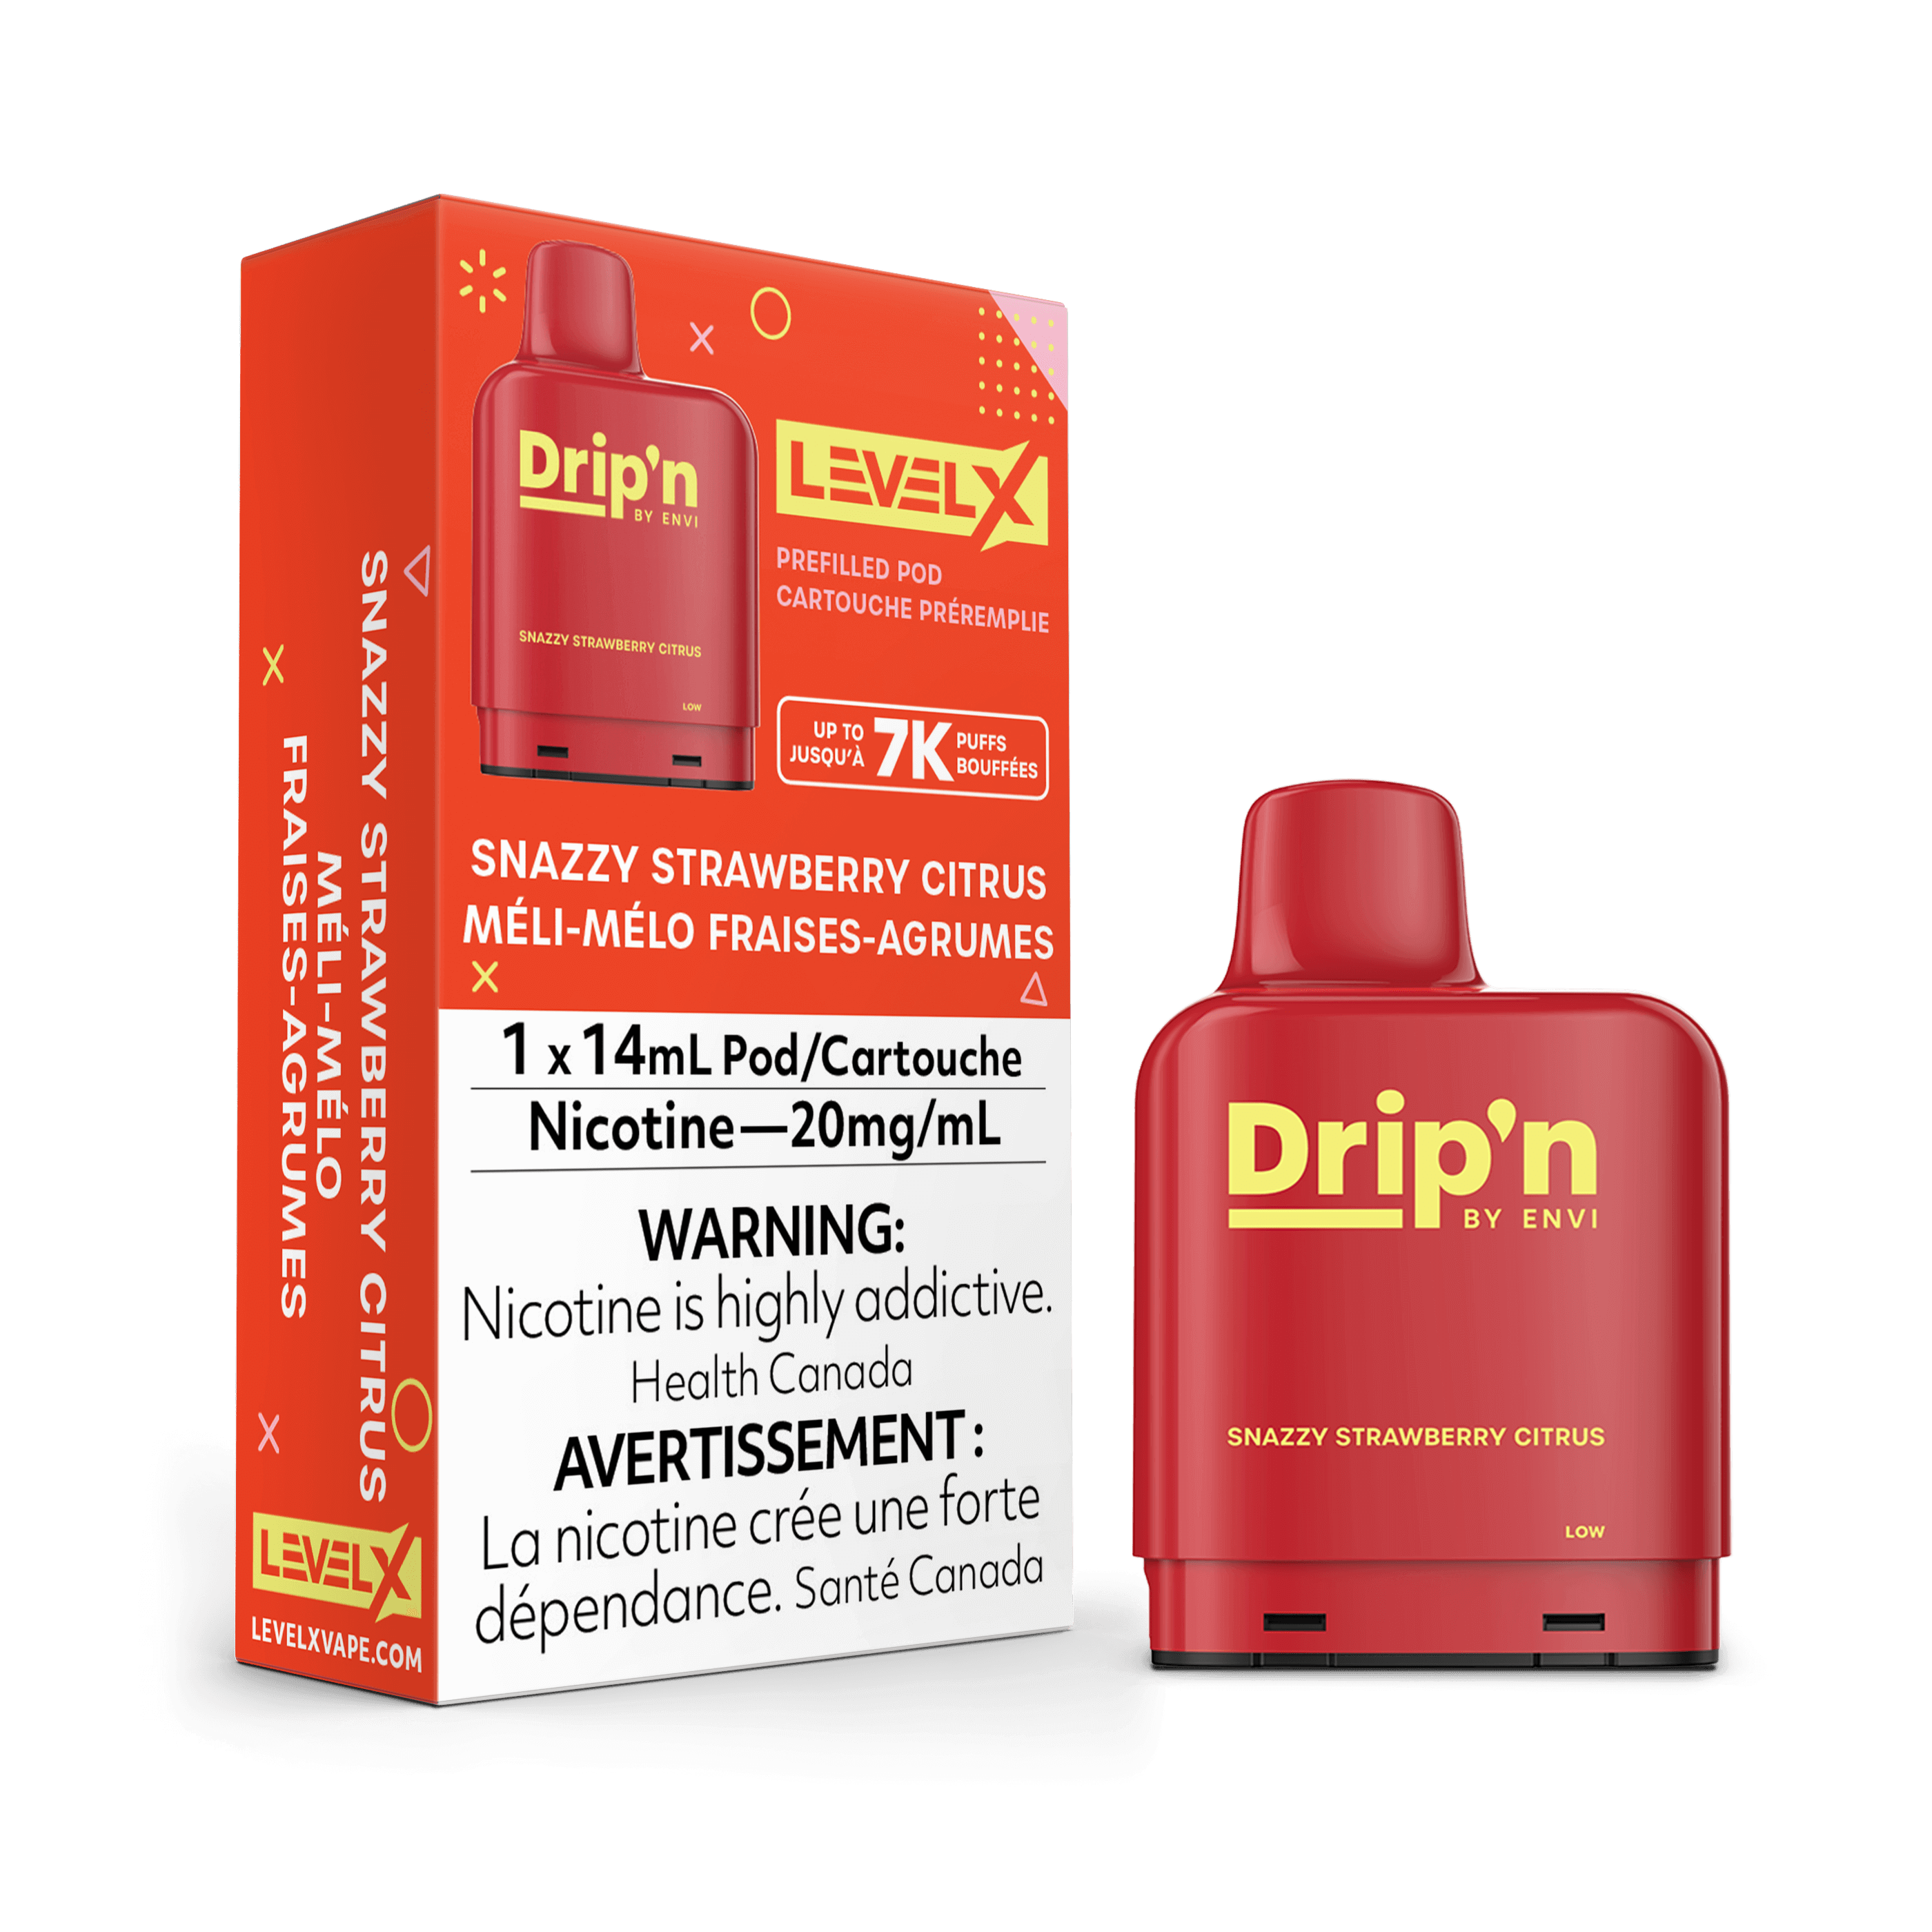 Level X Drip'n- Snazzy Strawberry Citrus